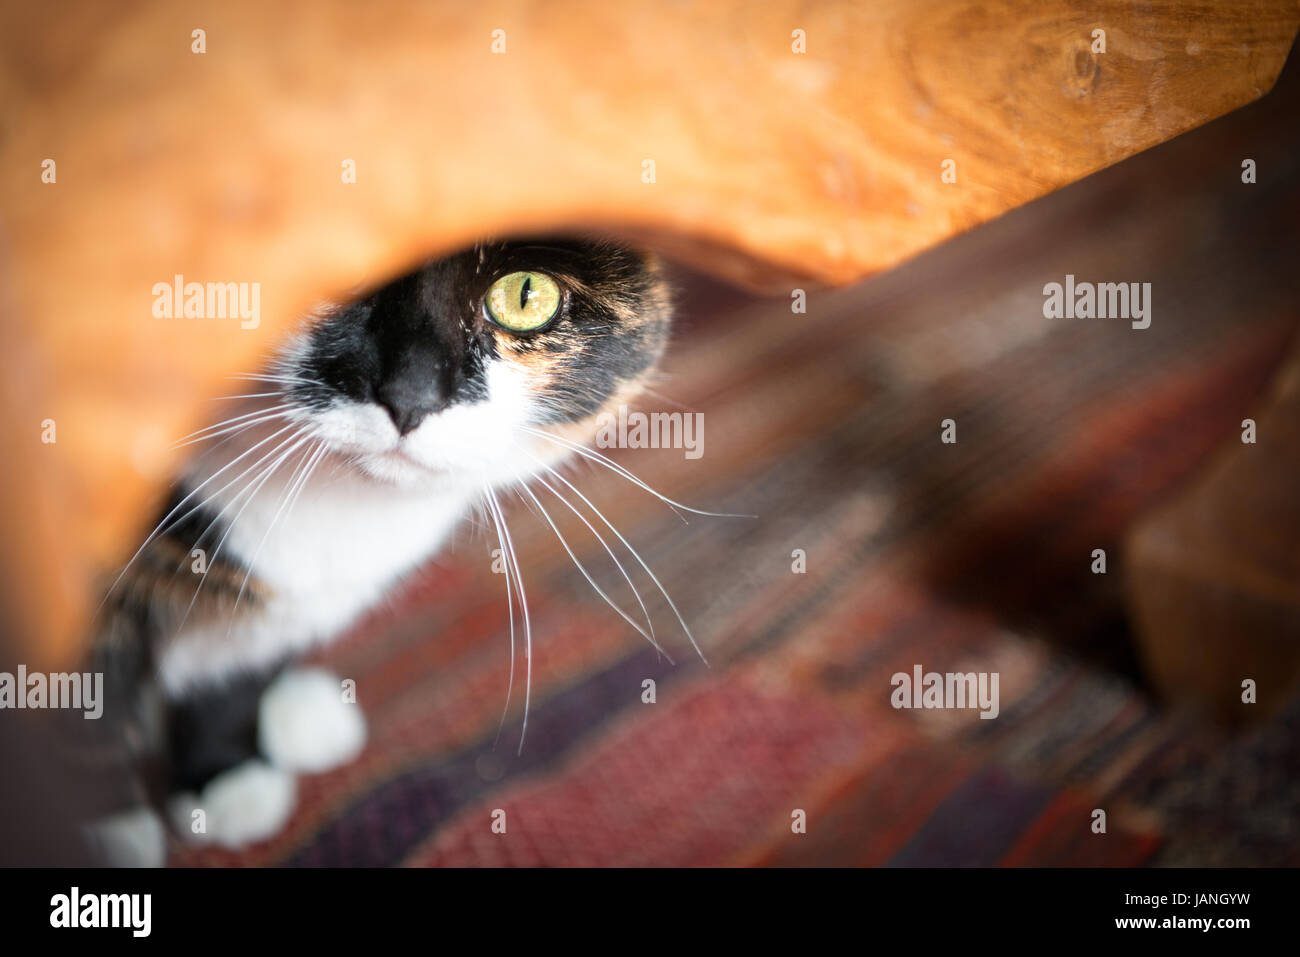 Beautiful calico cat peaking out from under a wooden table with pinpoint focus on the eye and shallow depth of field. Stock Photo